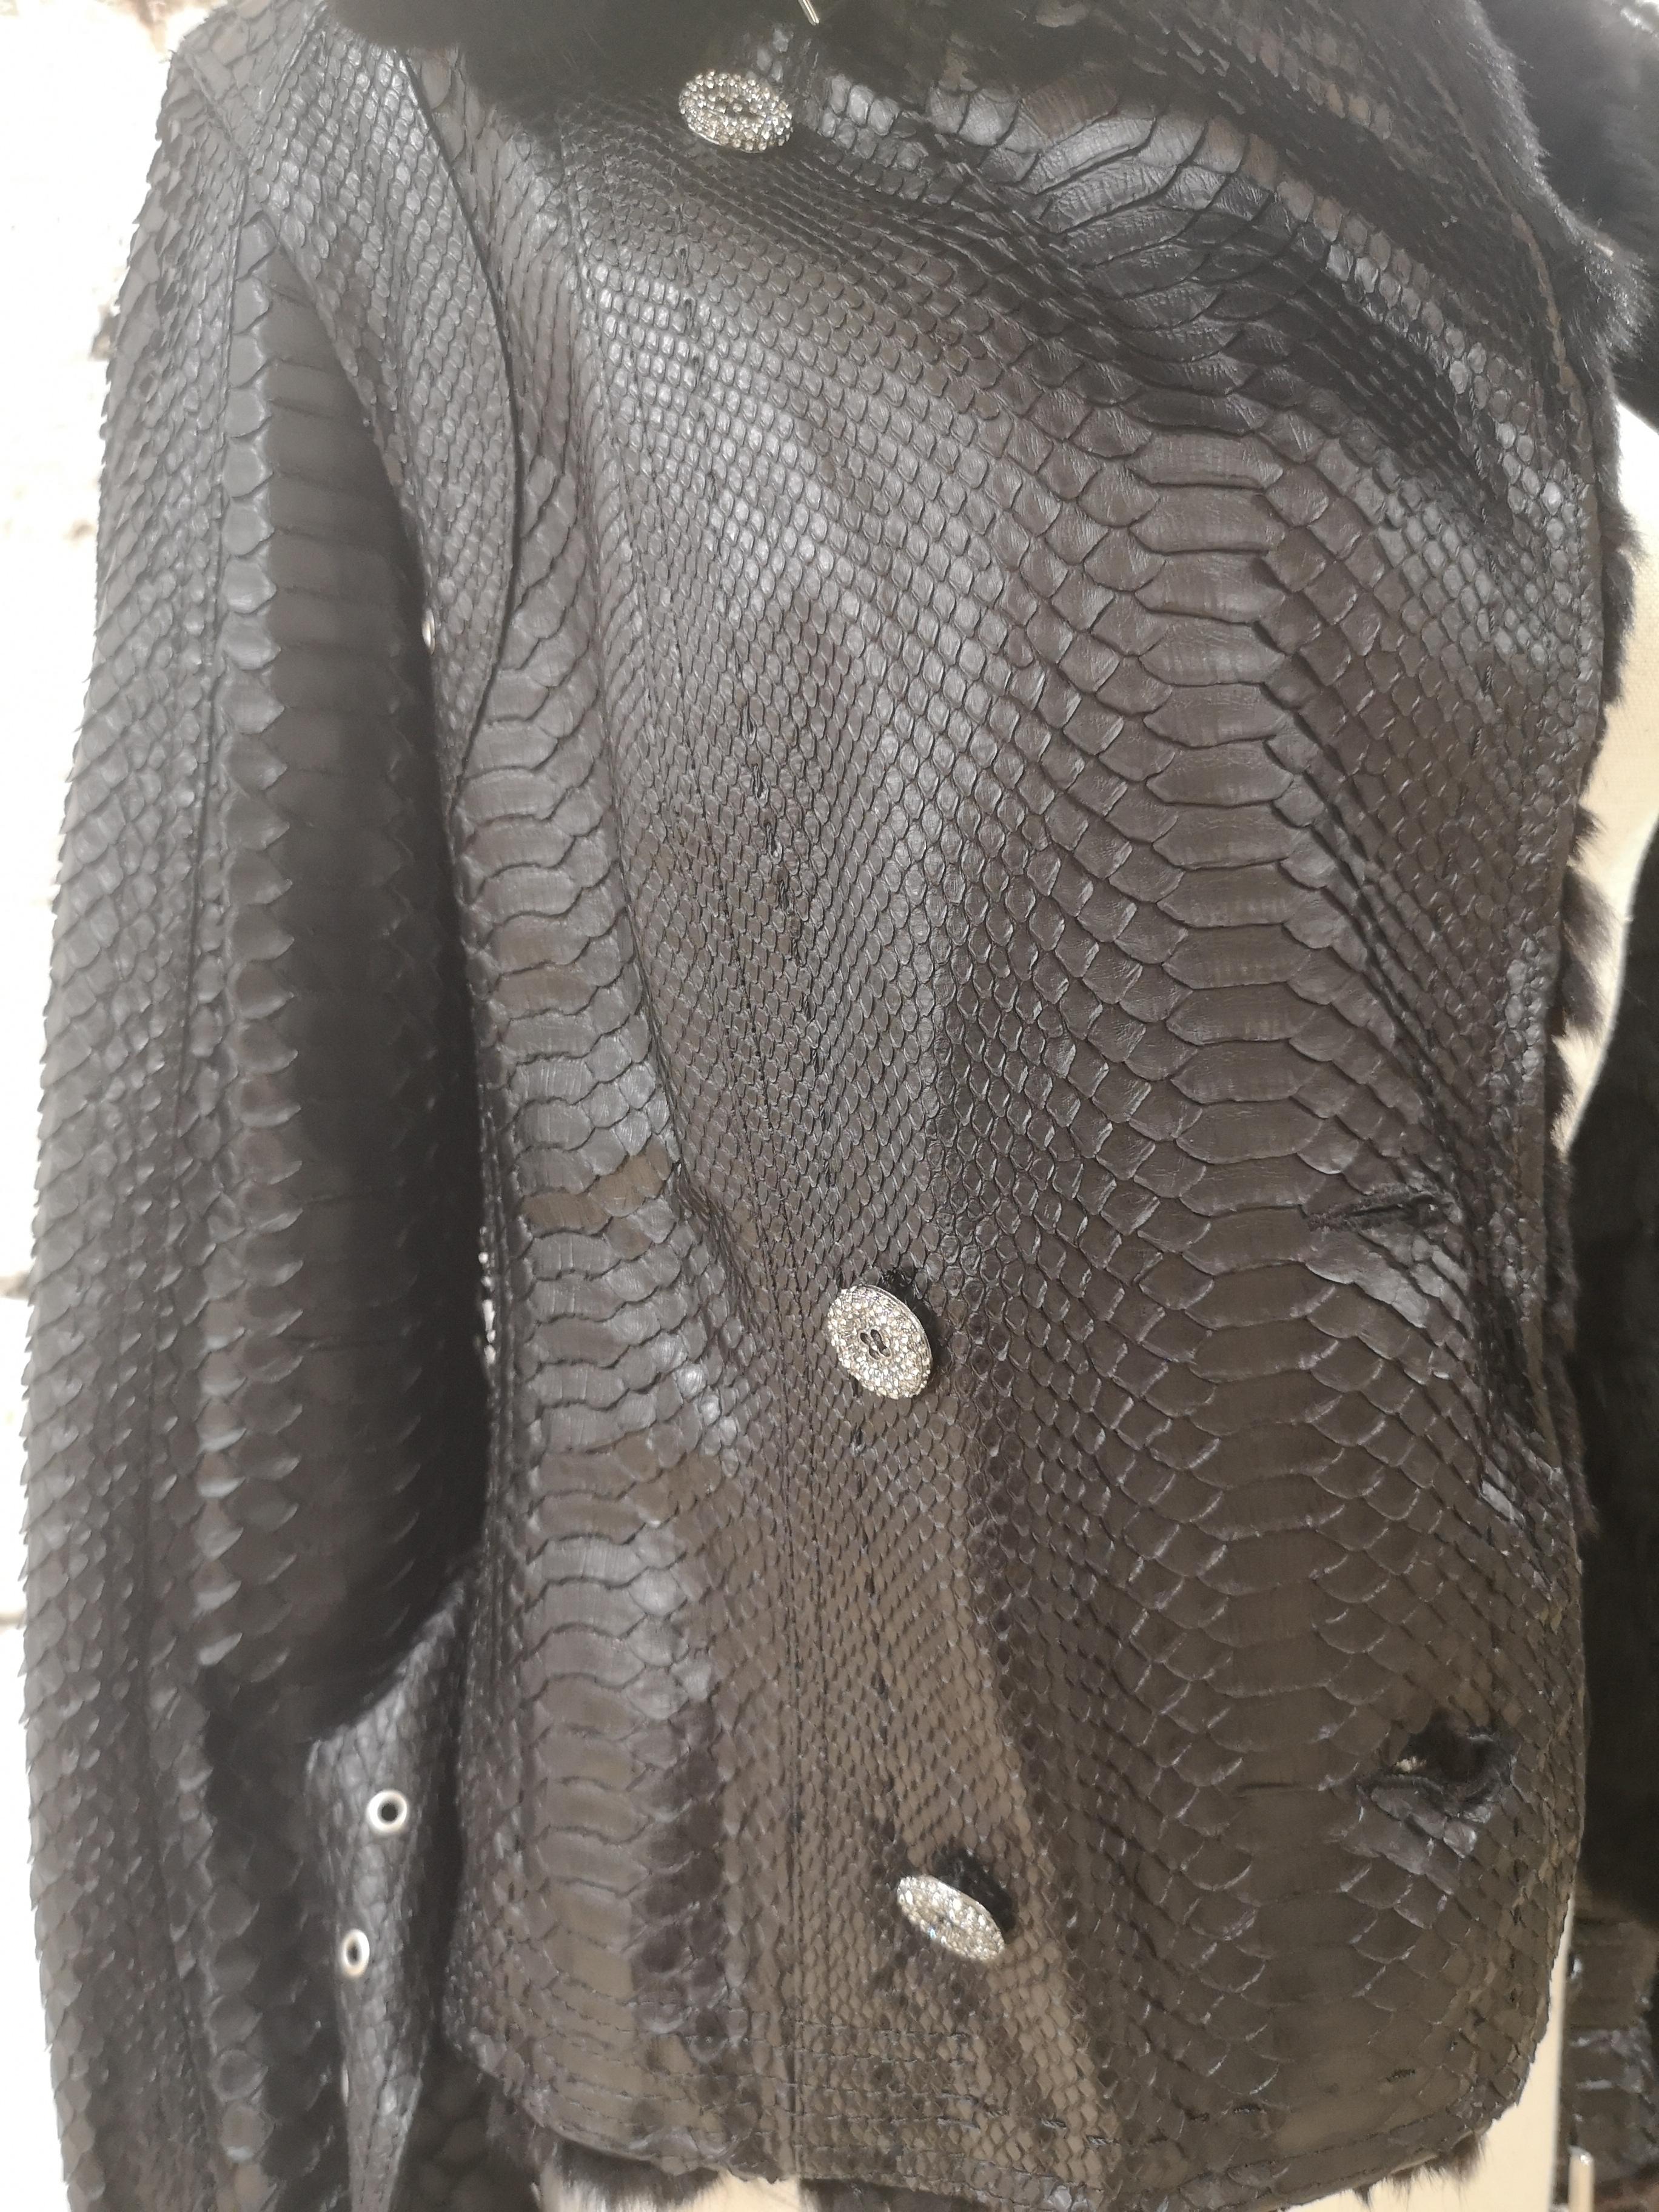 Gianfranco Ferrè iconic snake skin bomber jacket
An iconic piece by Ferrè embellished with brass buttons, a belt and a squirrel fur lining
totally made in italy in size 44
 
Length: 55 cm
Shoulders: 45 cm
Chest width: 42 cm
Sleeve length: 66 cm